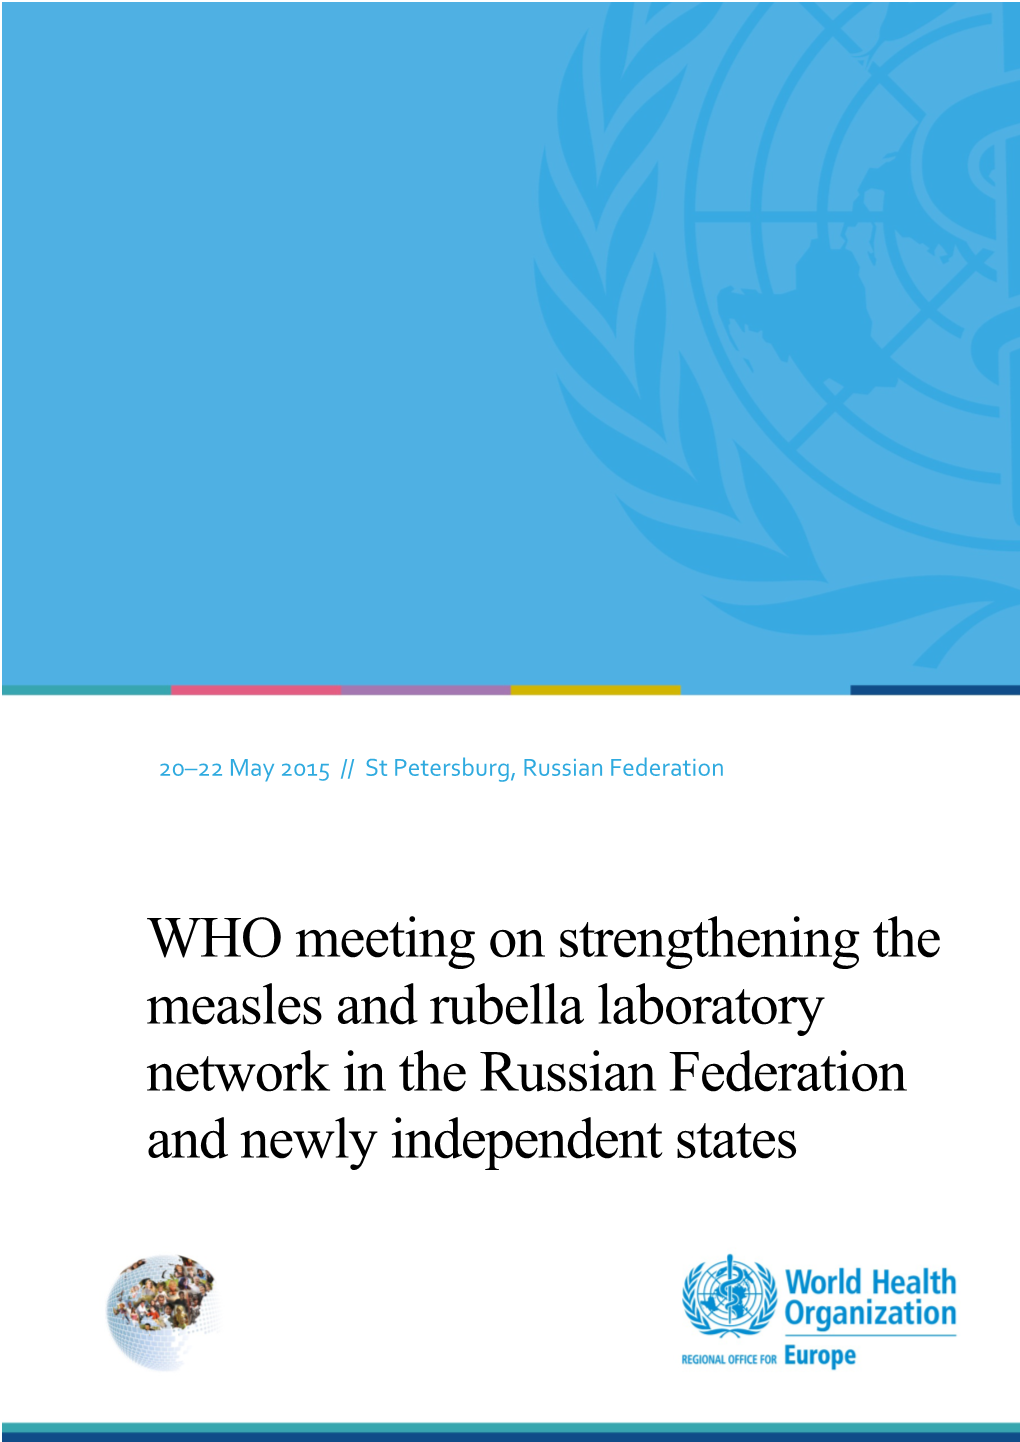 WHO Meeting on Strengthening the Measles and Rubella Laboratory Network in the Russian Federation and Newly Independent States